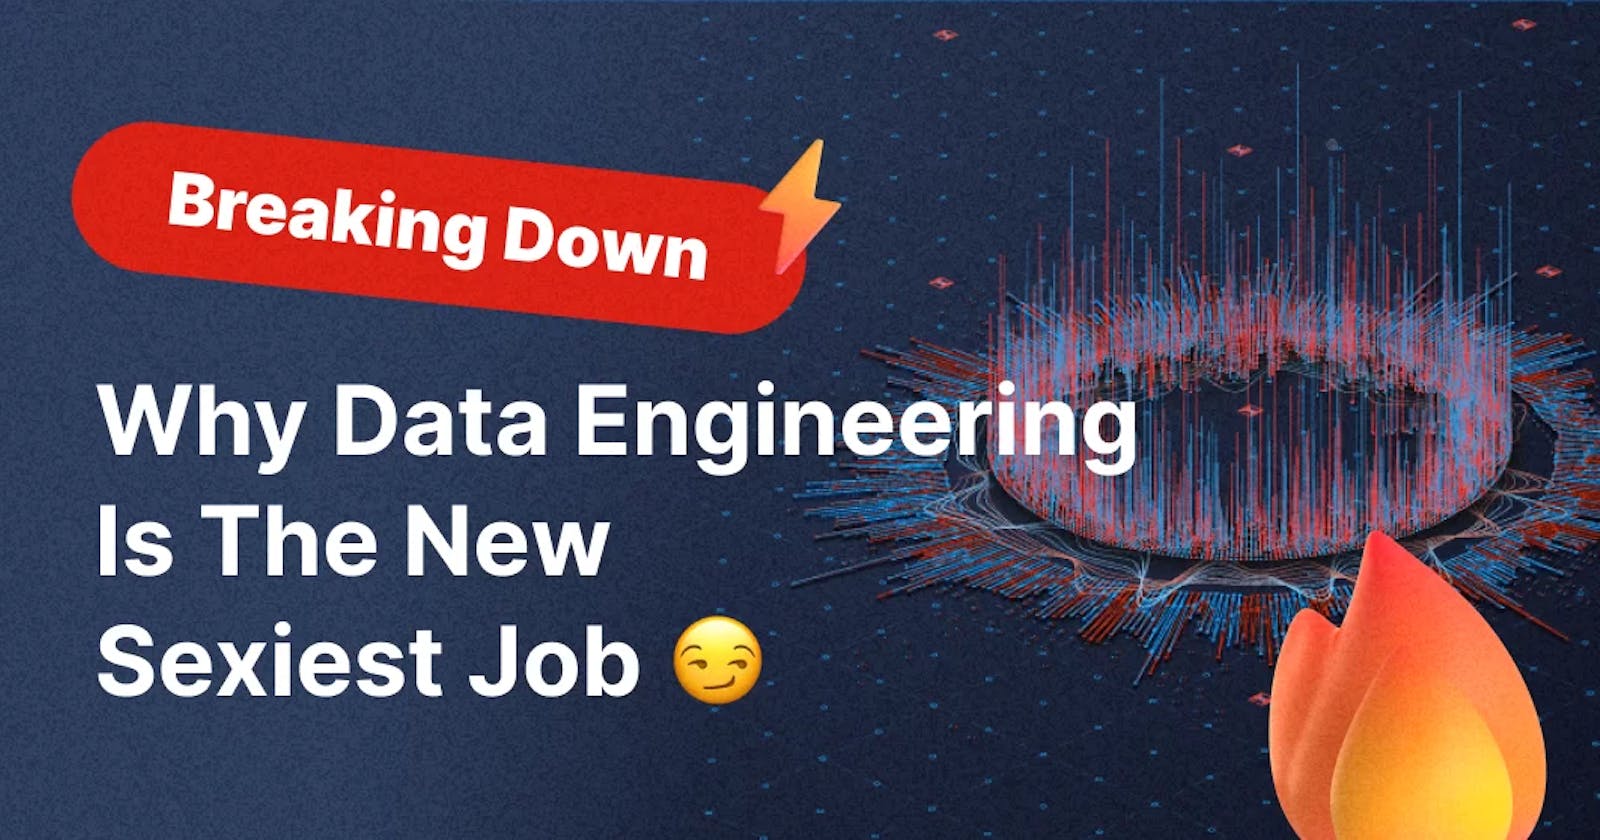 Breaking Down Why Data Engineering Is The New Sexiest Job